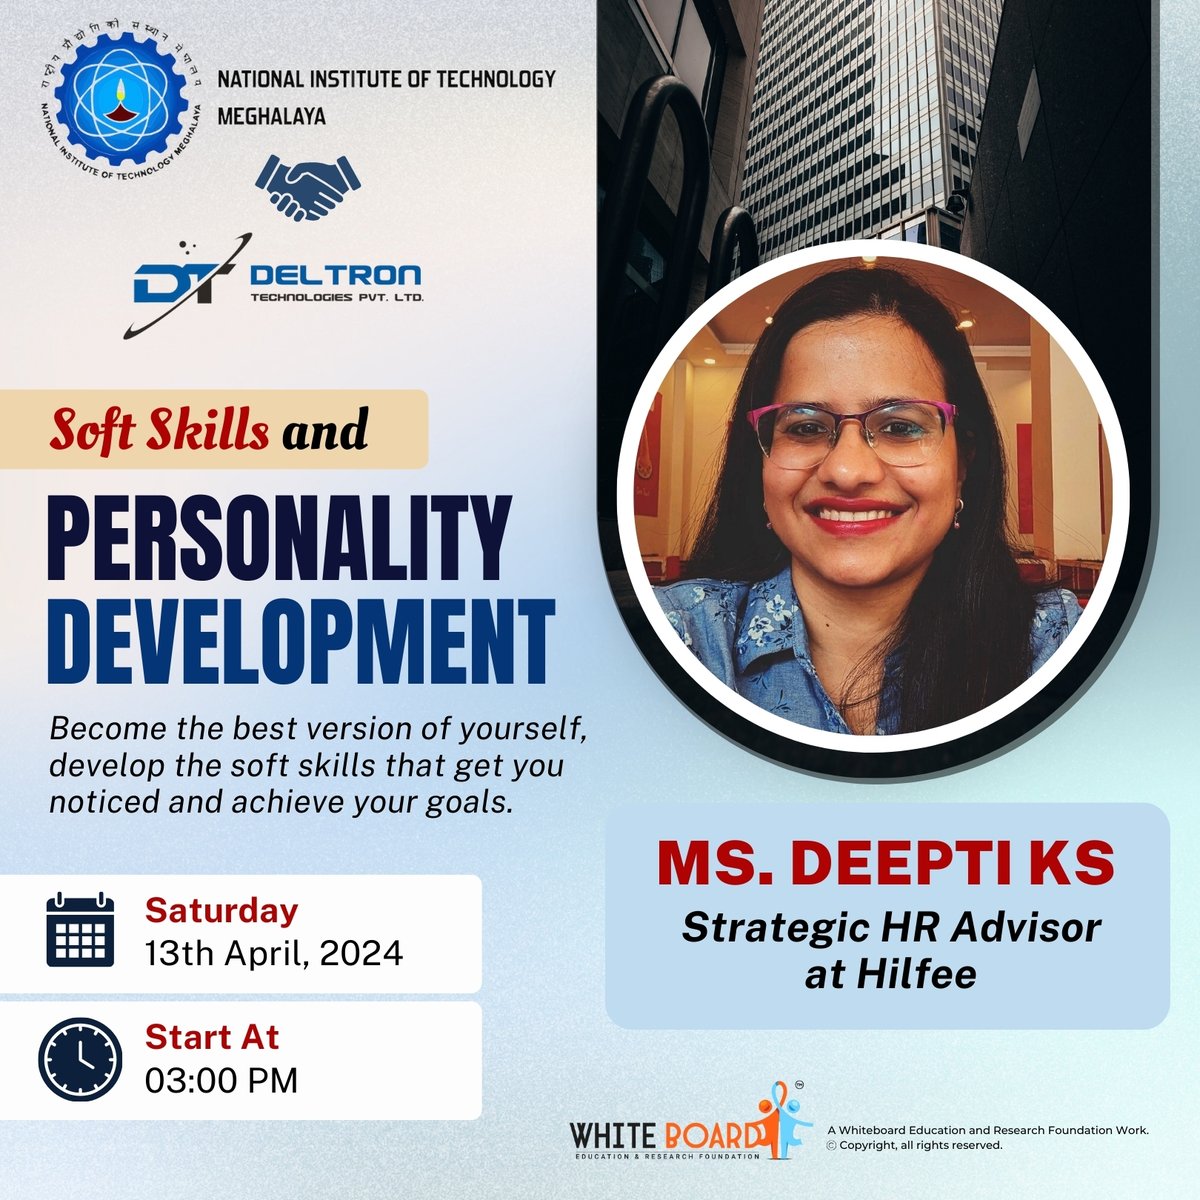 Empowering Future: A #Webinar on #SoftSkills & #PersonalityDevelopment. This #weekend @WhiteboardERF is co-hosting an insightful #session designed to propel the #career of youth with @NITMeghalaya. 
Our #speaker, Ms. Deepti KS, #Strategic #HRAdvisor at Hilfee & a #TophrVoice.